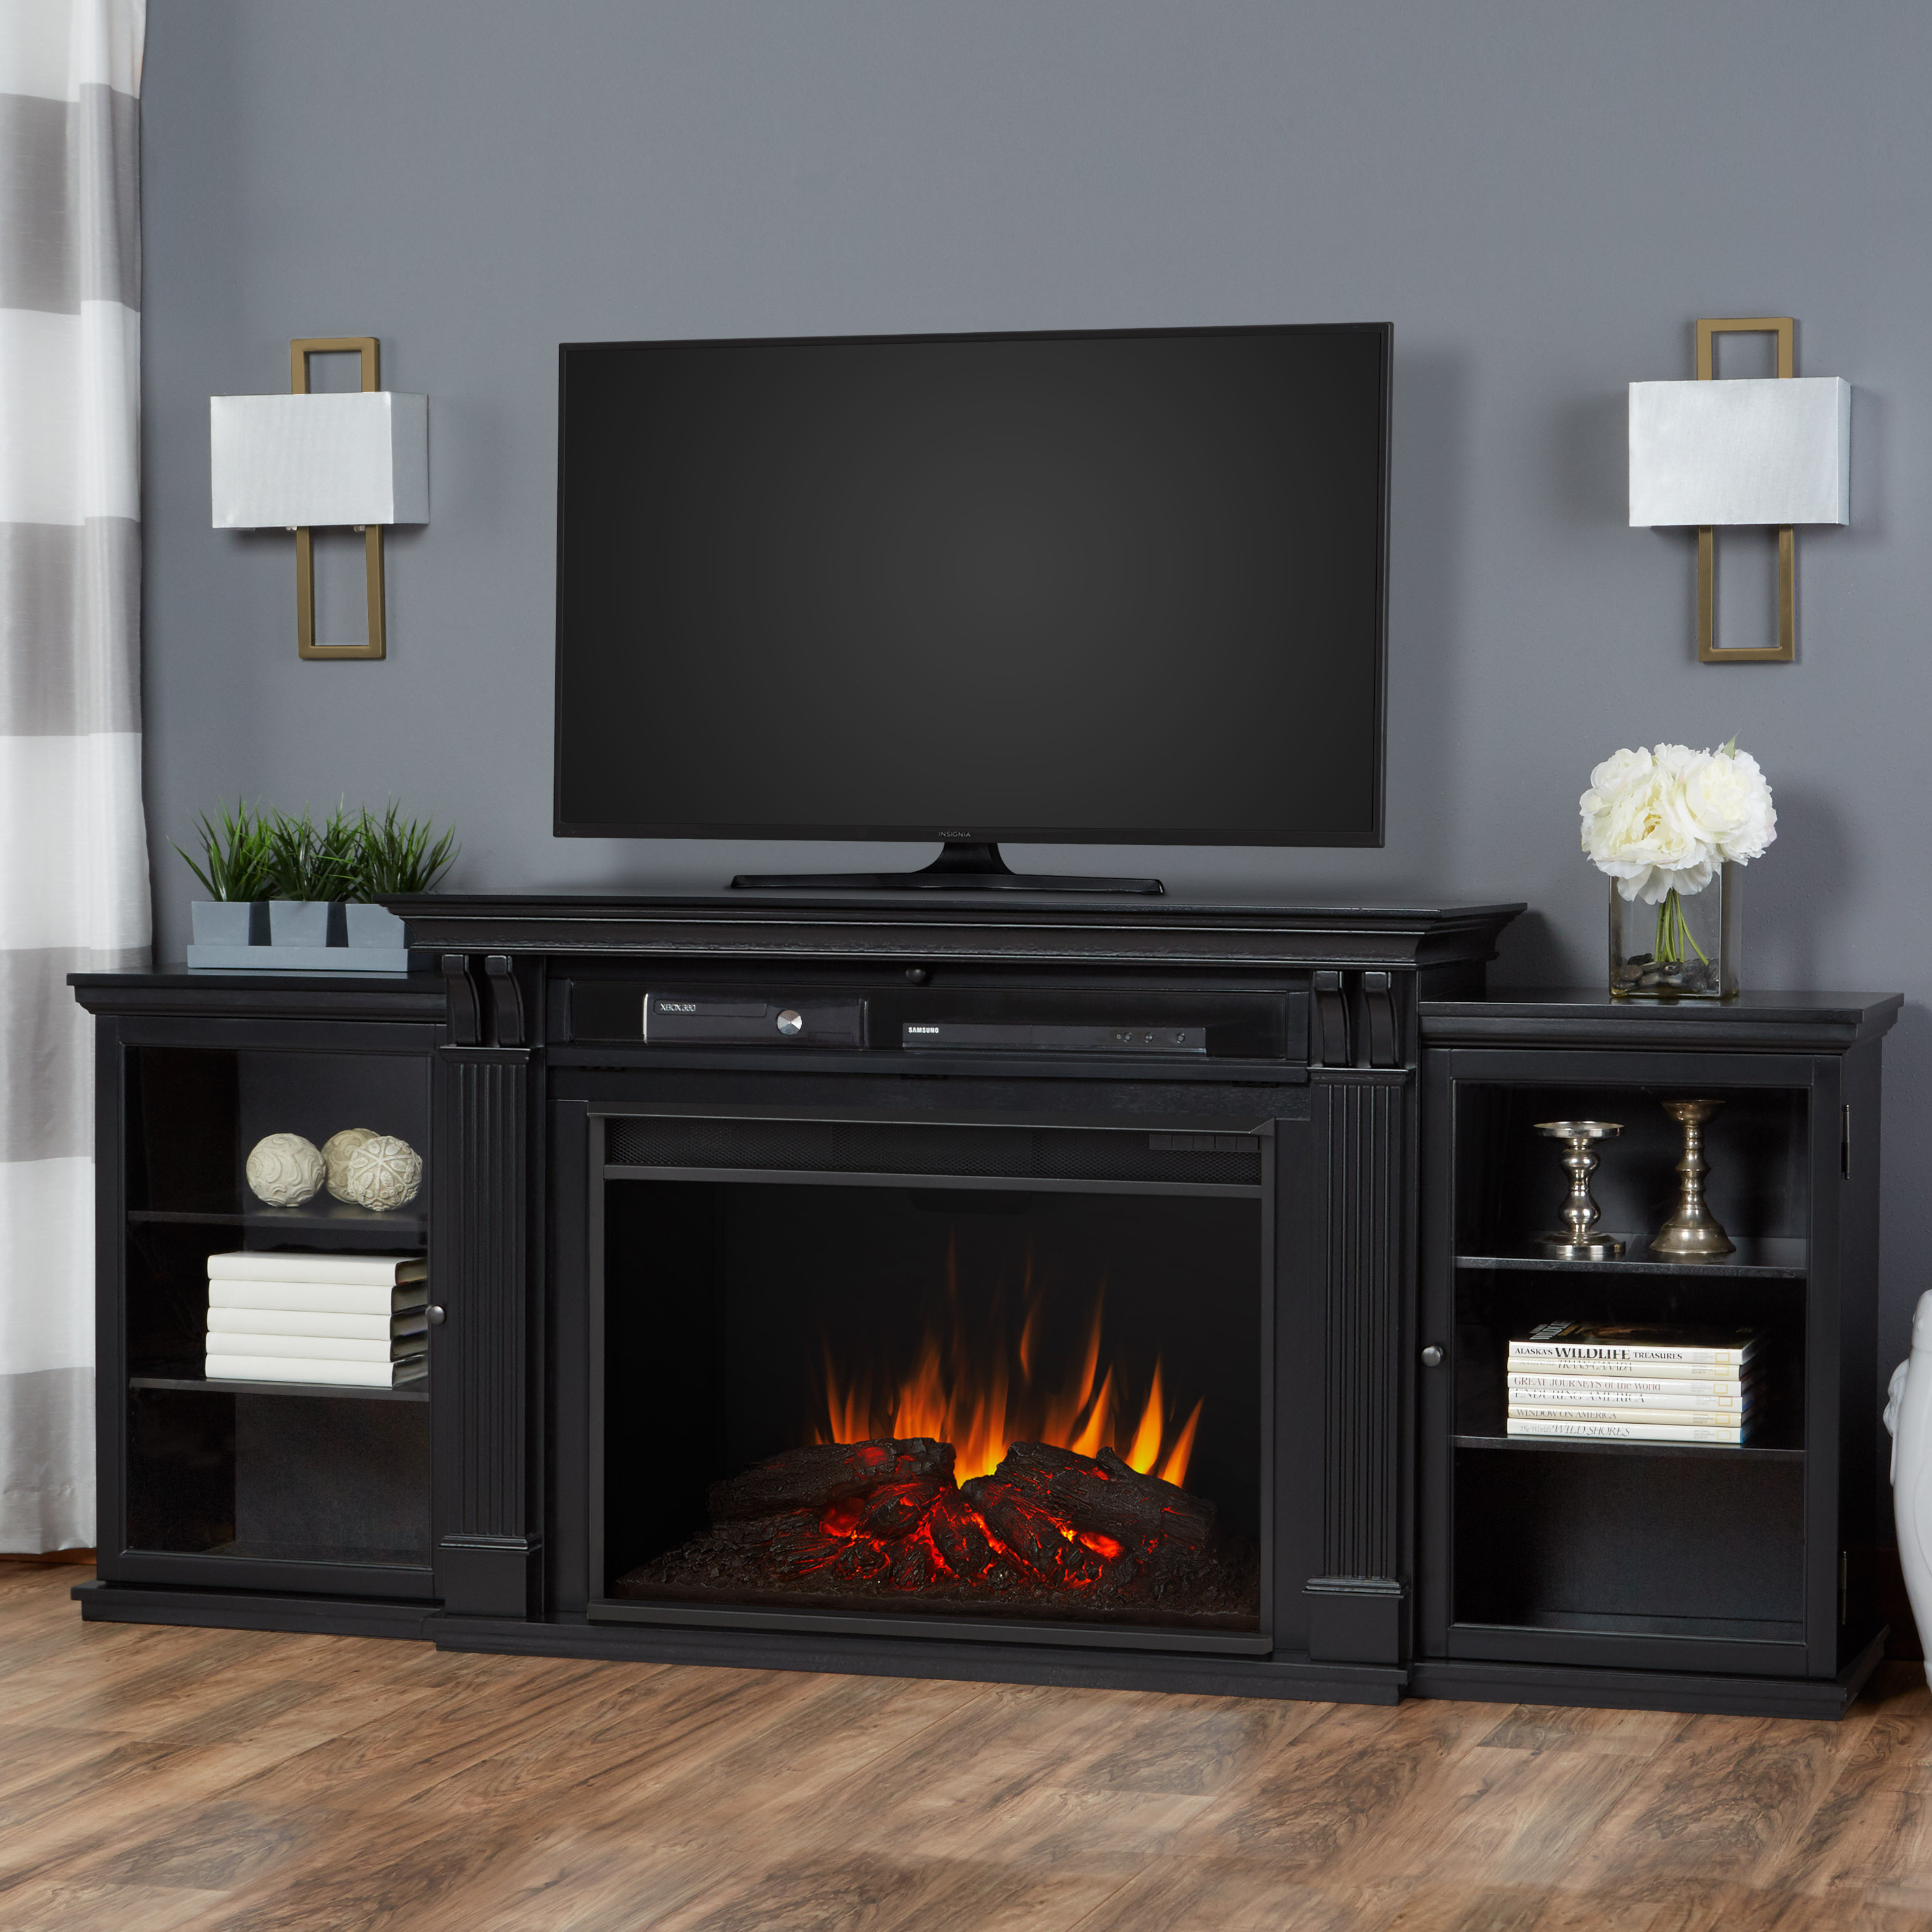 Tracey Grand TV Stand for TVs up to 48" with Fireplace Included